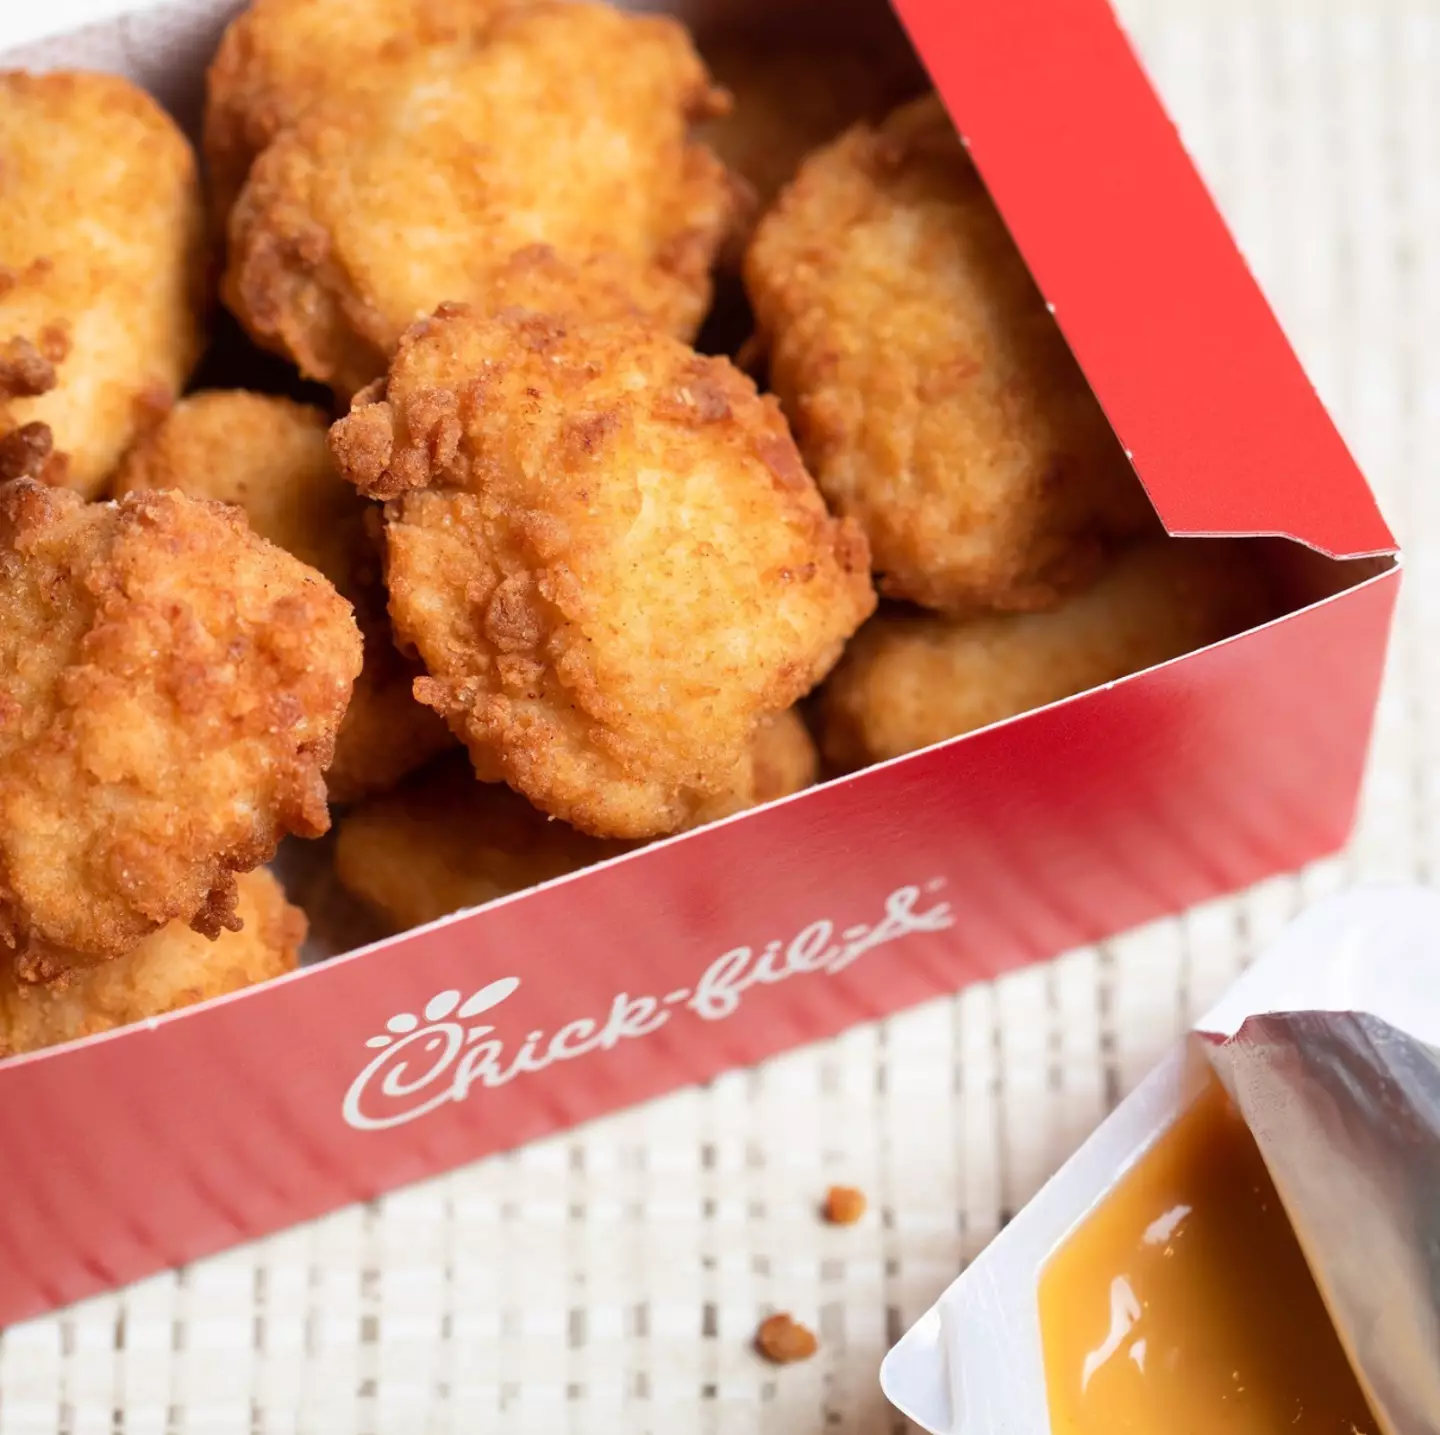 Chick-fil-A nuggets took first place. (Instagram/@chickfila)